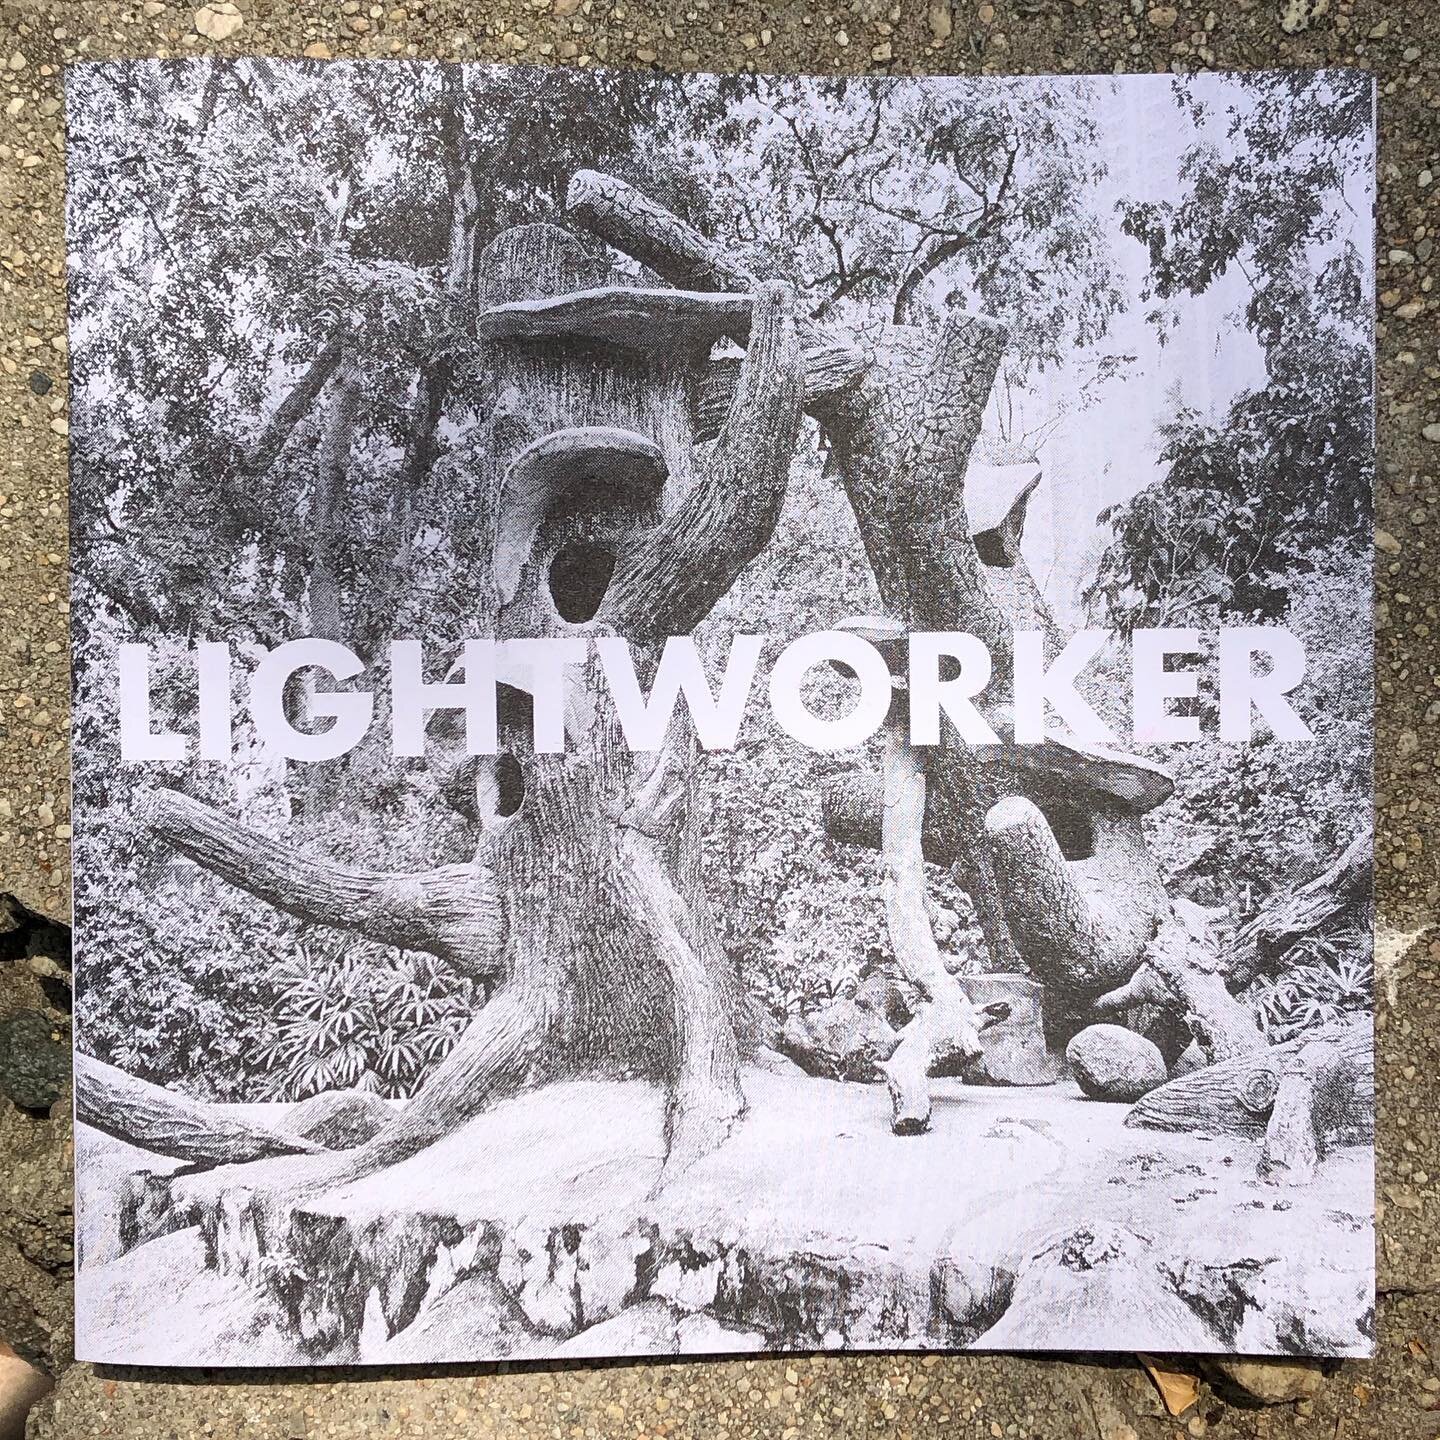 💡LIGHTWORKER #1 is fresh off the stapler! After deep diving into the world of redpills and pepes for most of the summer, I needed a bit of a break and black and white photography fit the bill. LIGHTWORKER is a sequence of photographs I made spanning